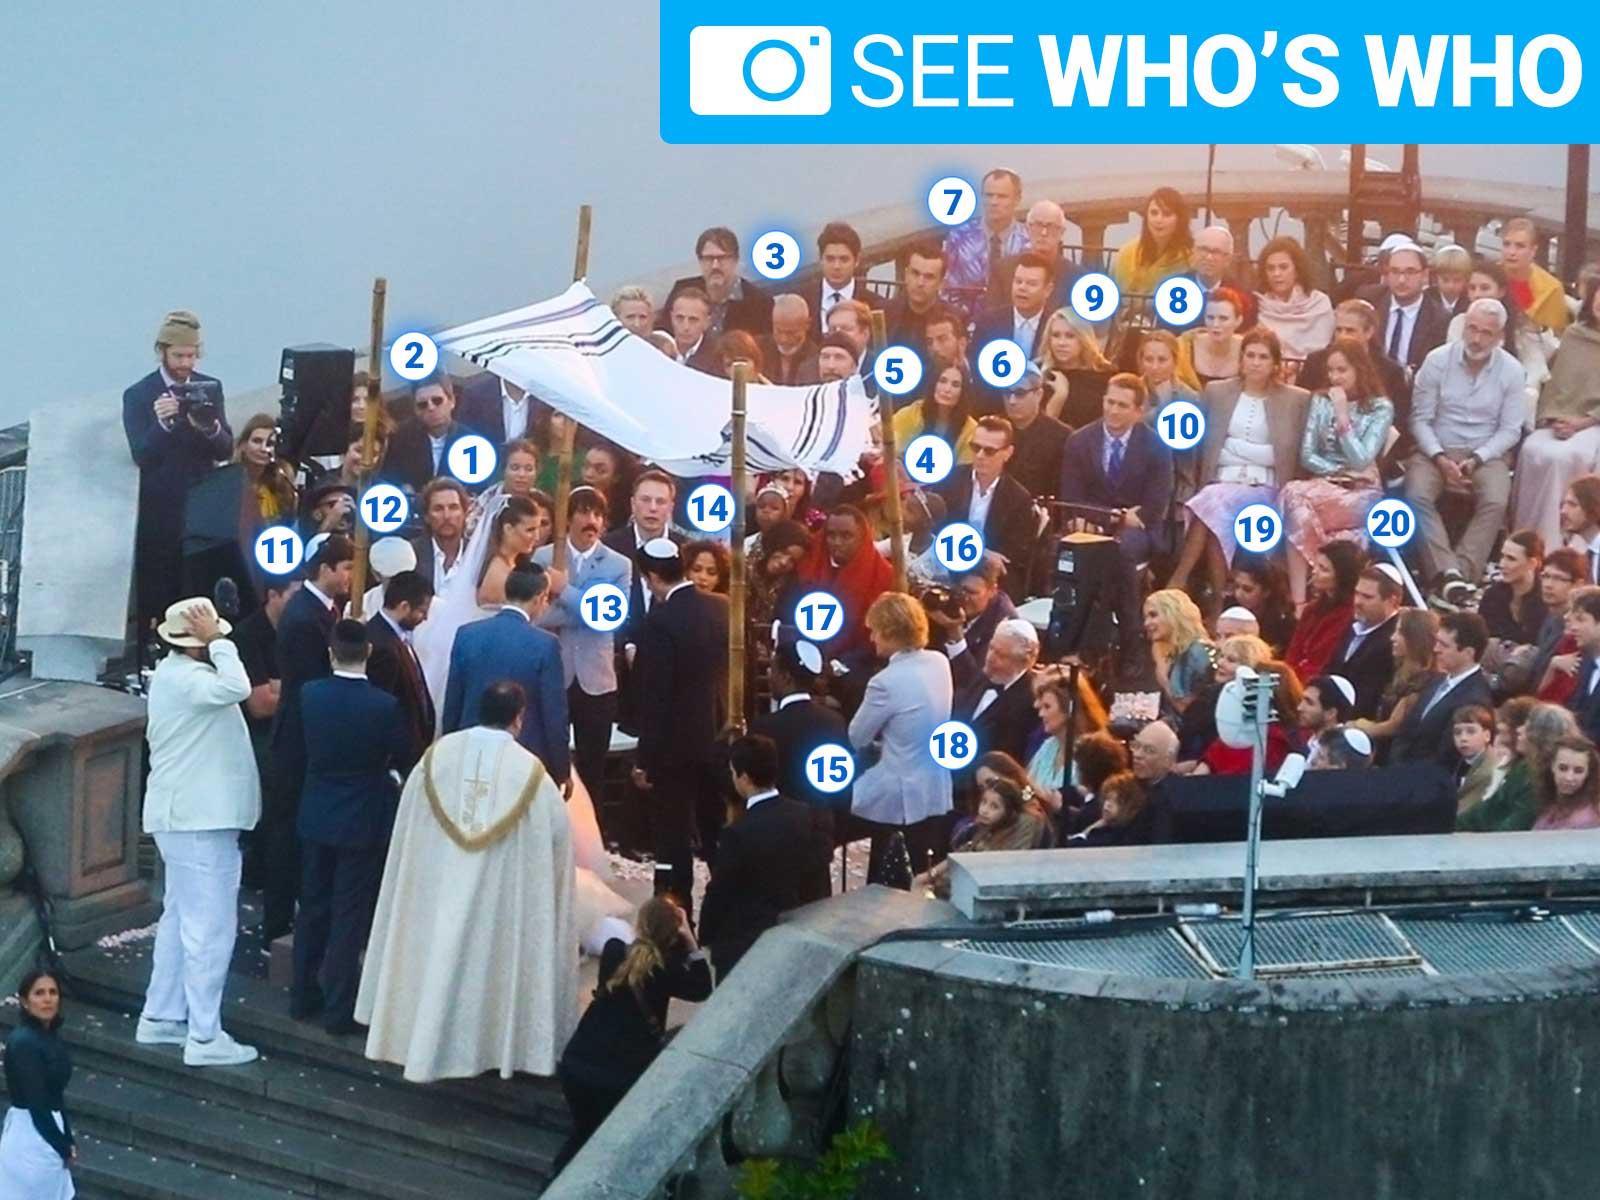 Madonna’s Manager’s Wedding Party: Holy Christ, That’s a Lot of Power!